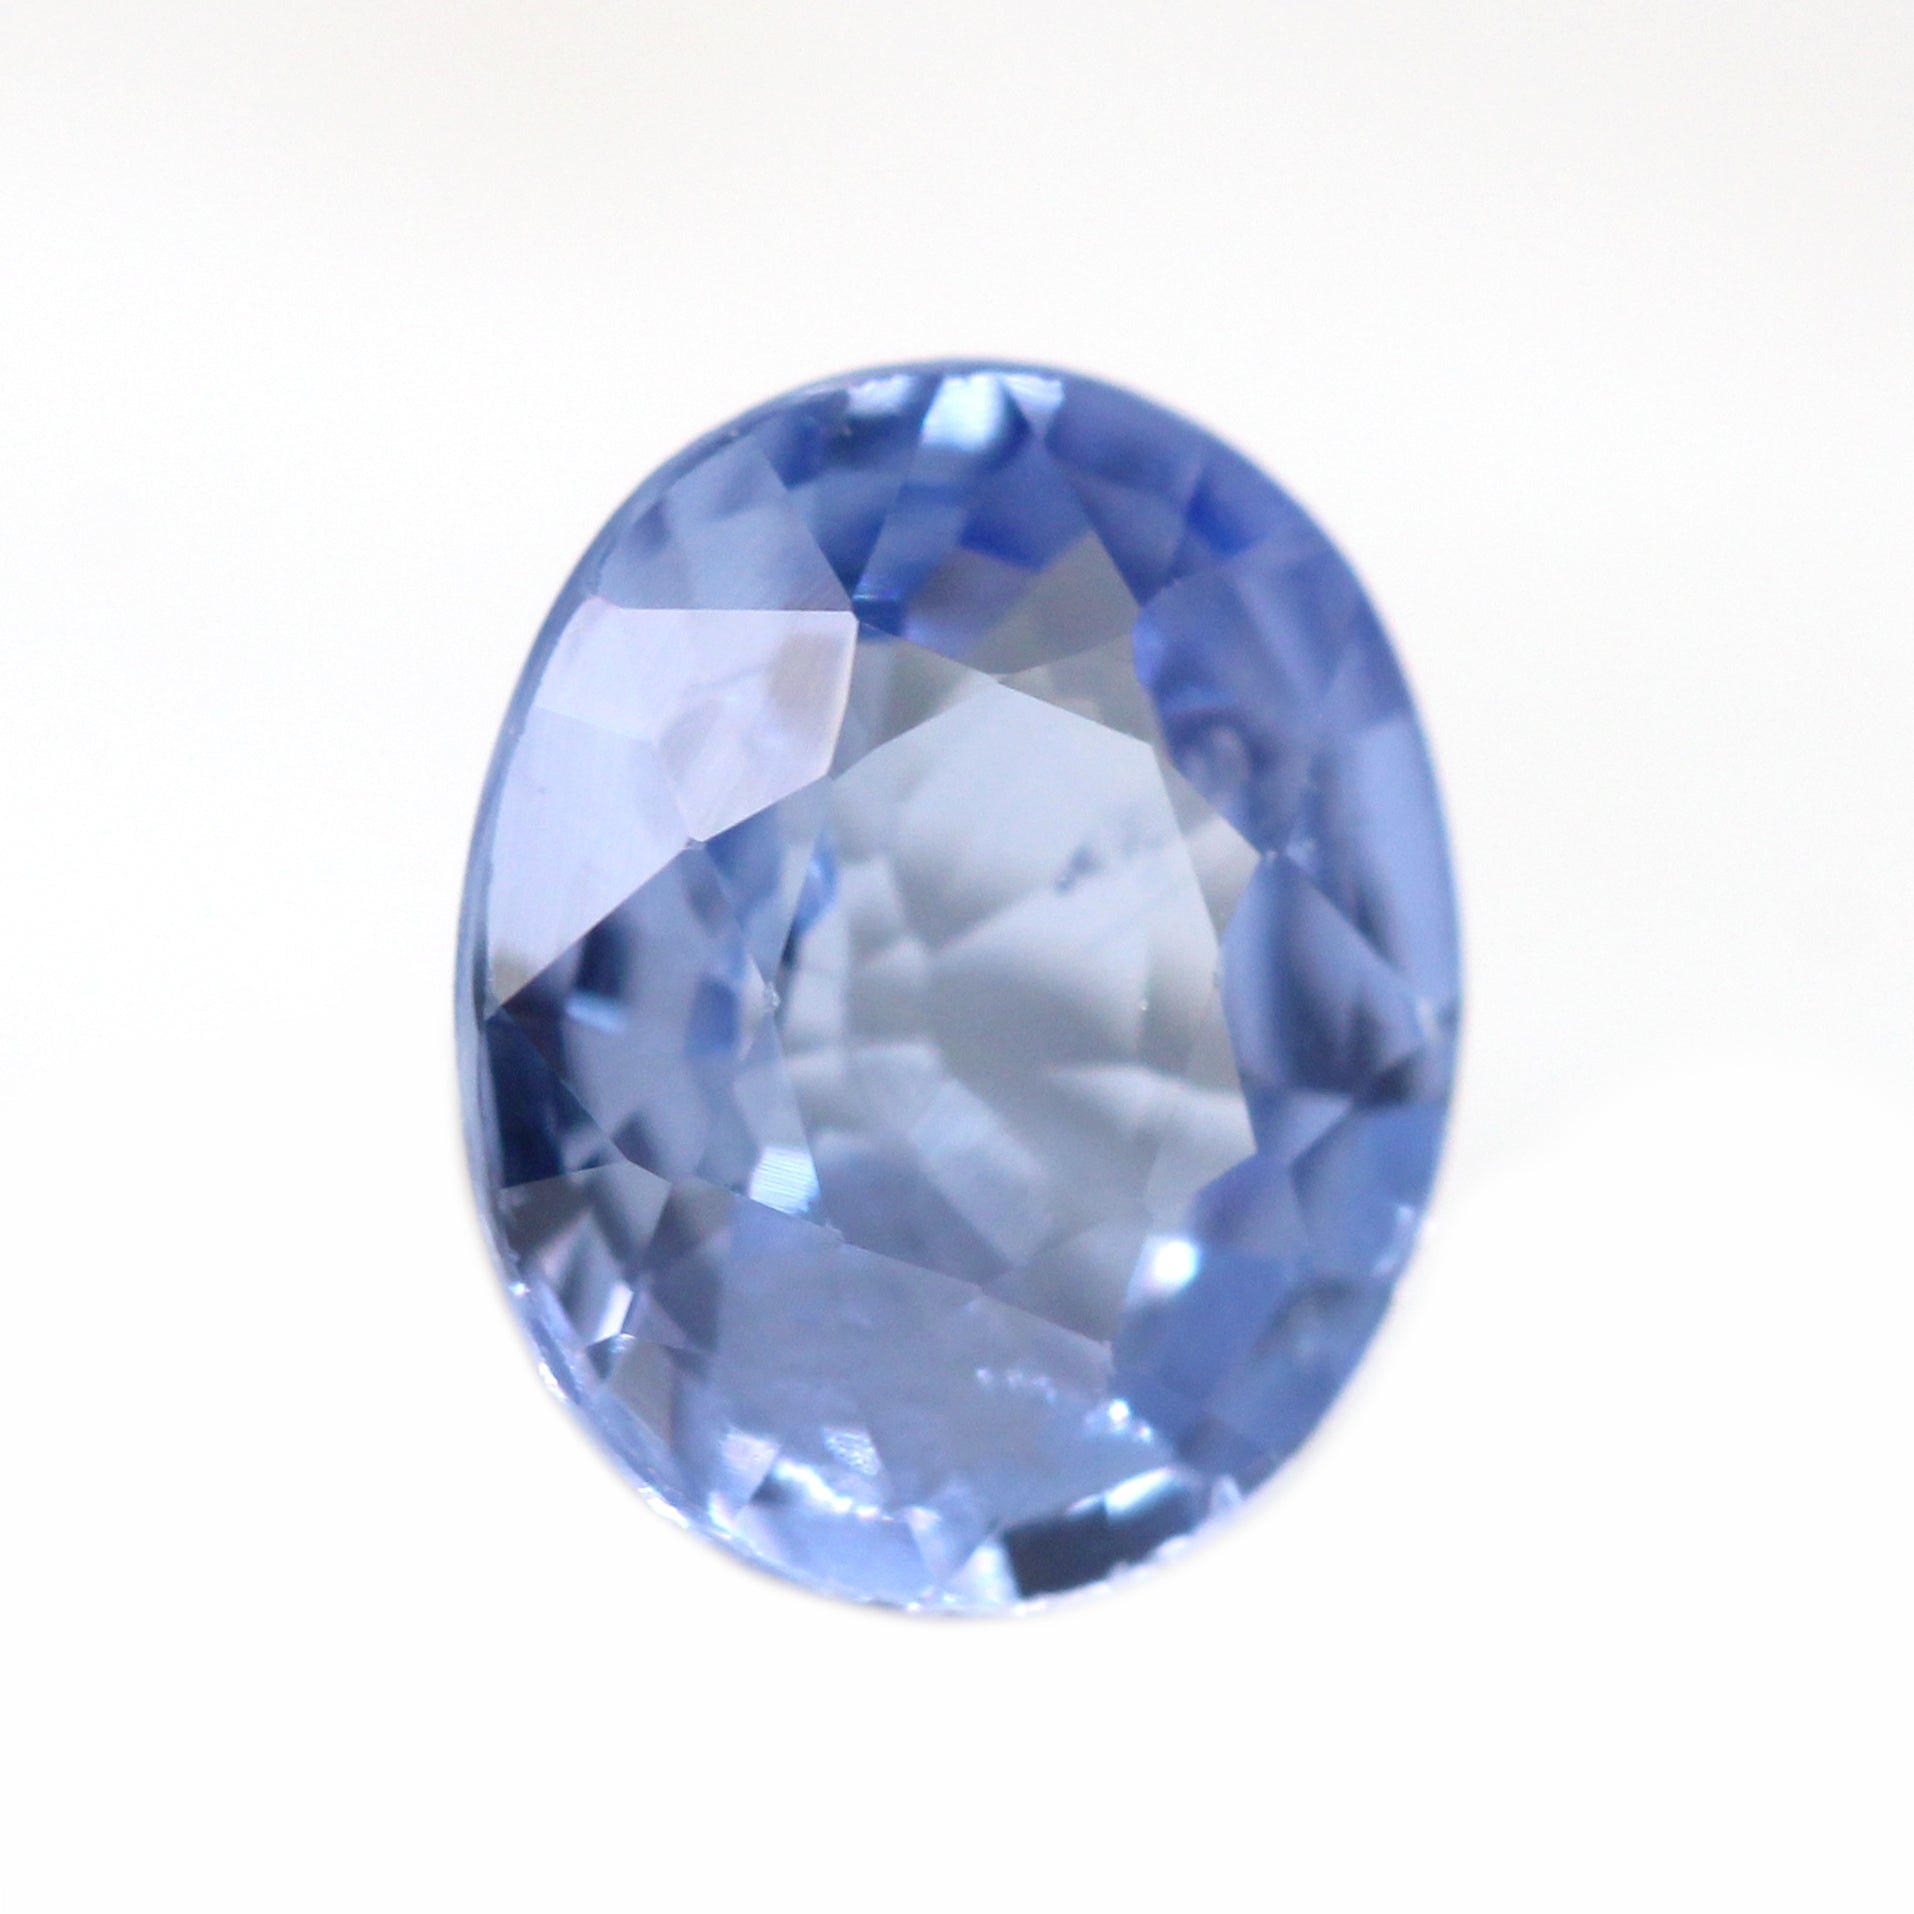 0.67 Carat Light Blue Oval Montana Sapphire for Custom Work - Inventory Code LBOS067 - Midwinter Co. Alternative Bridal Rings and Modern Fine Jewelry